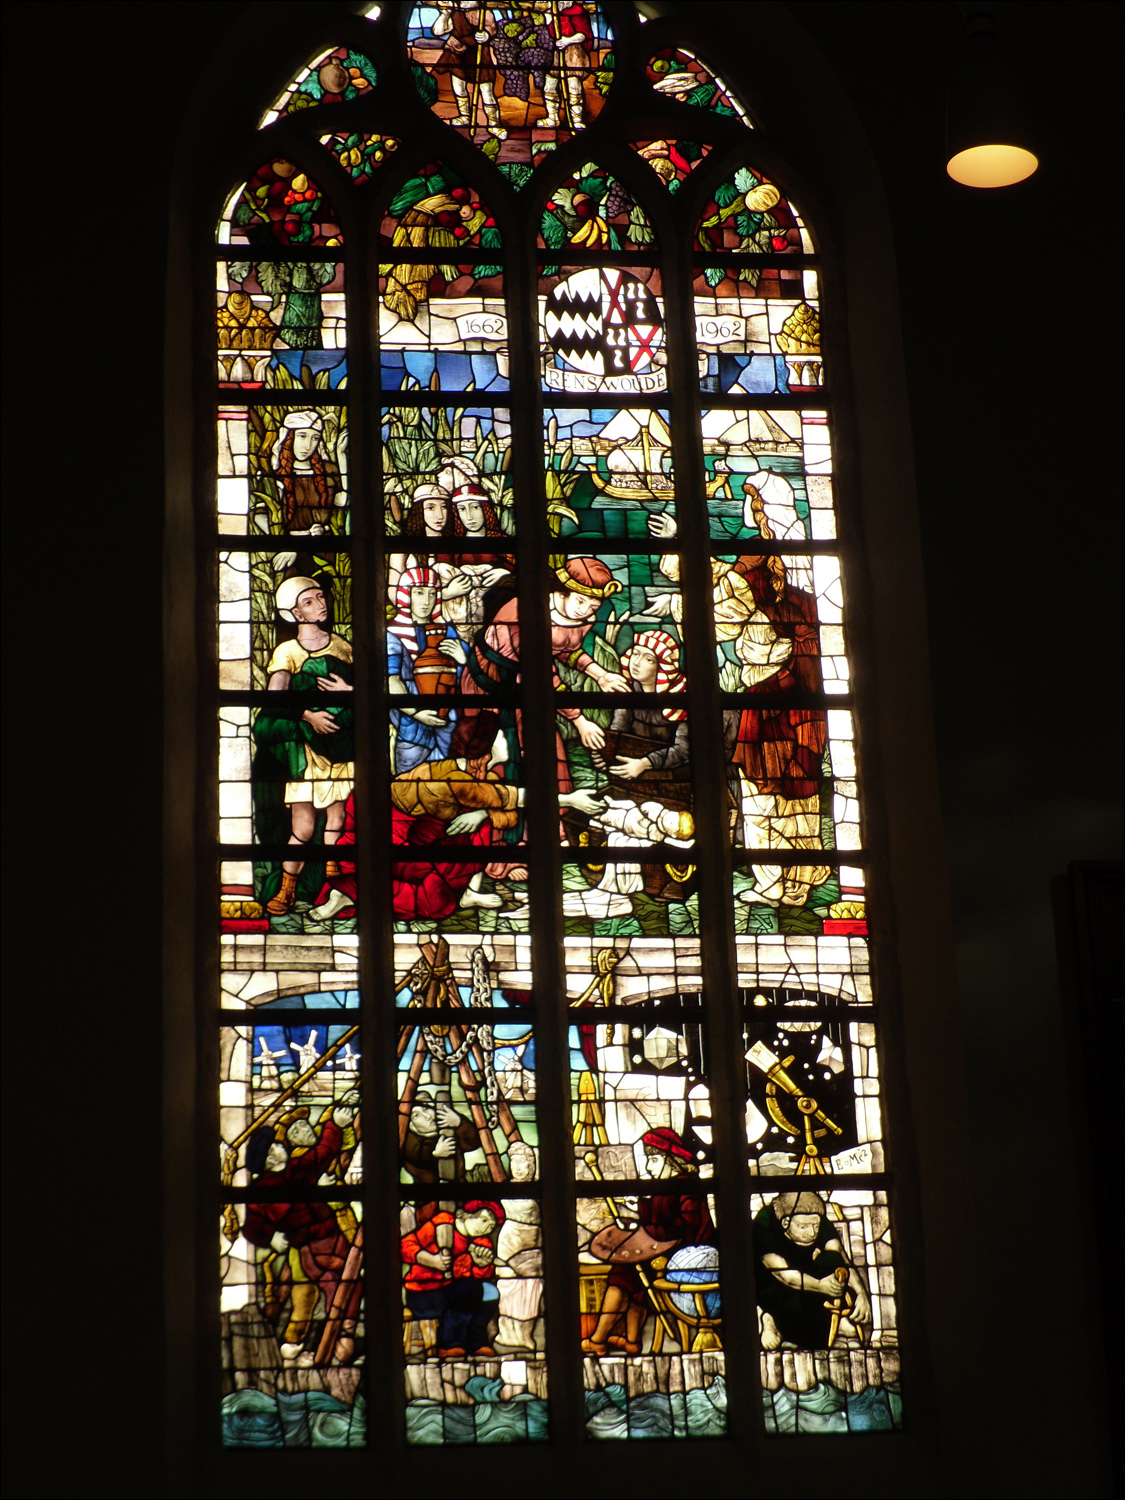 Oude Kerk- Stained glass